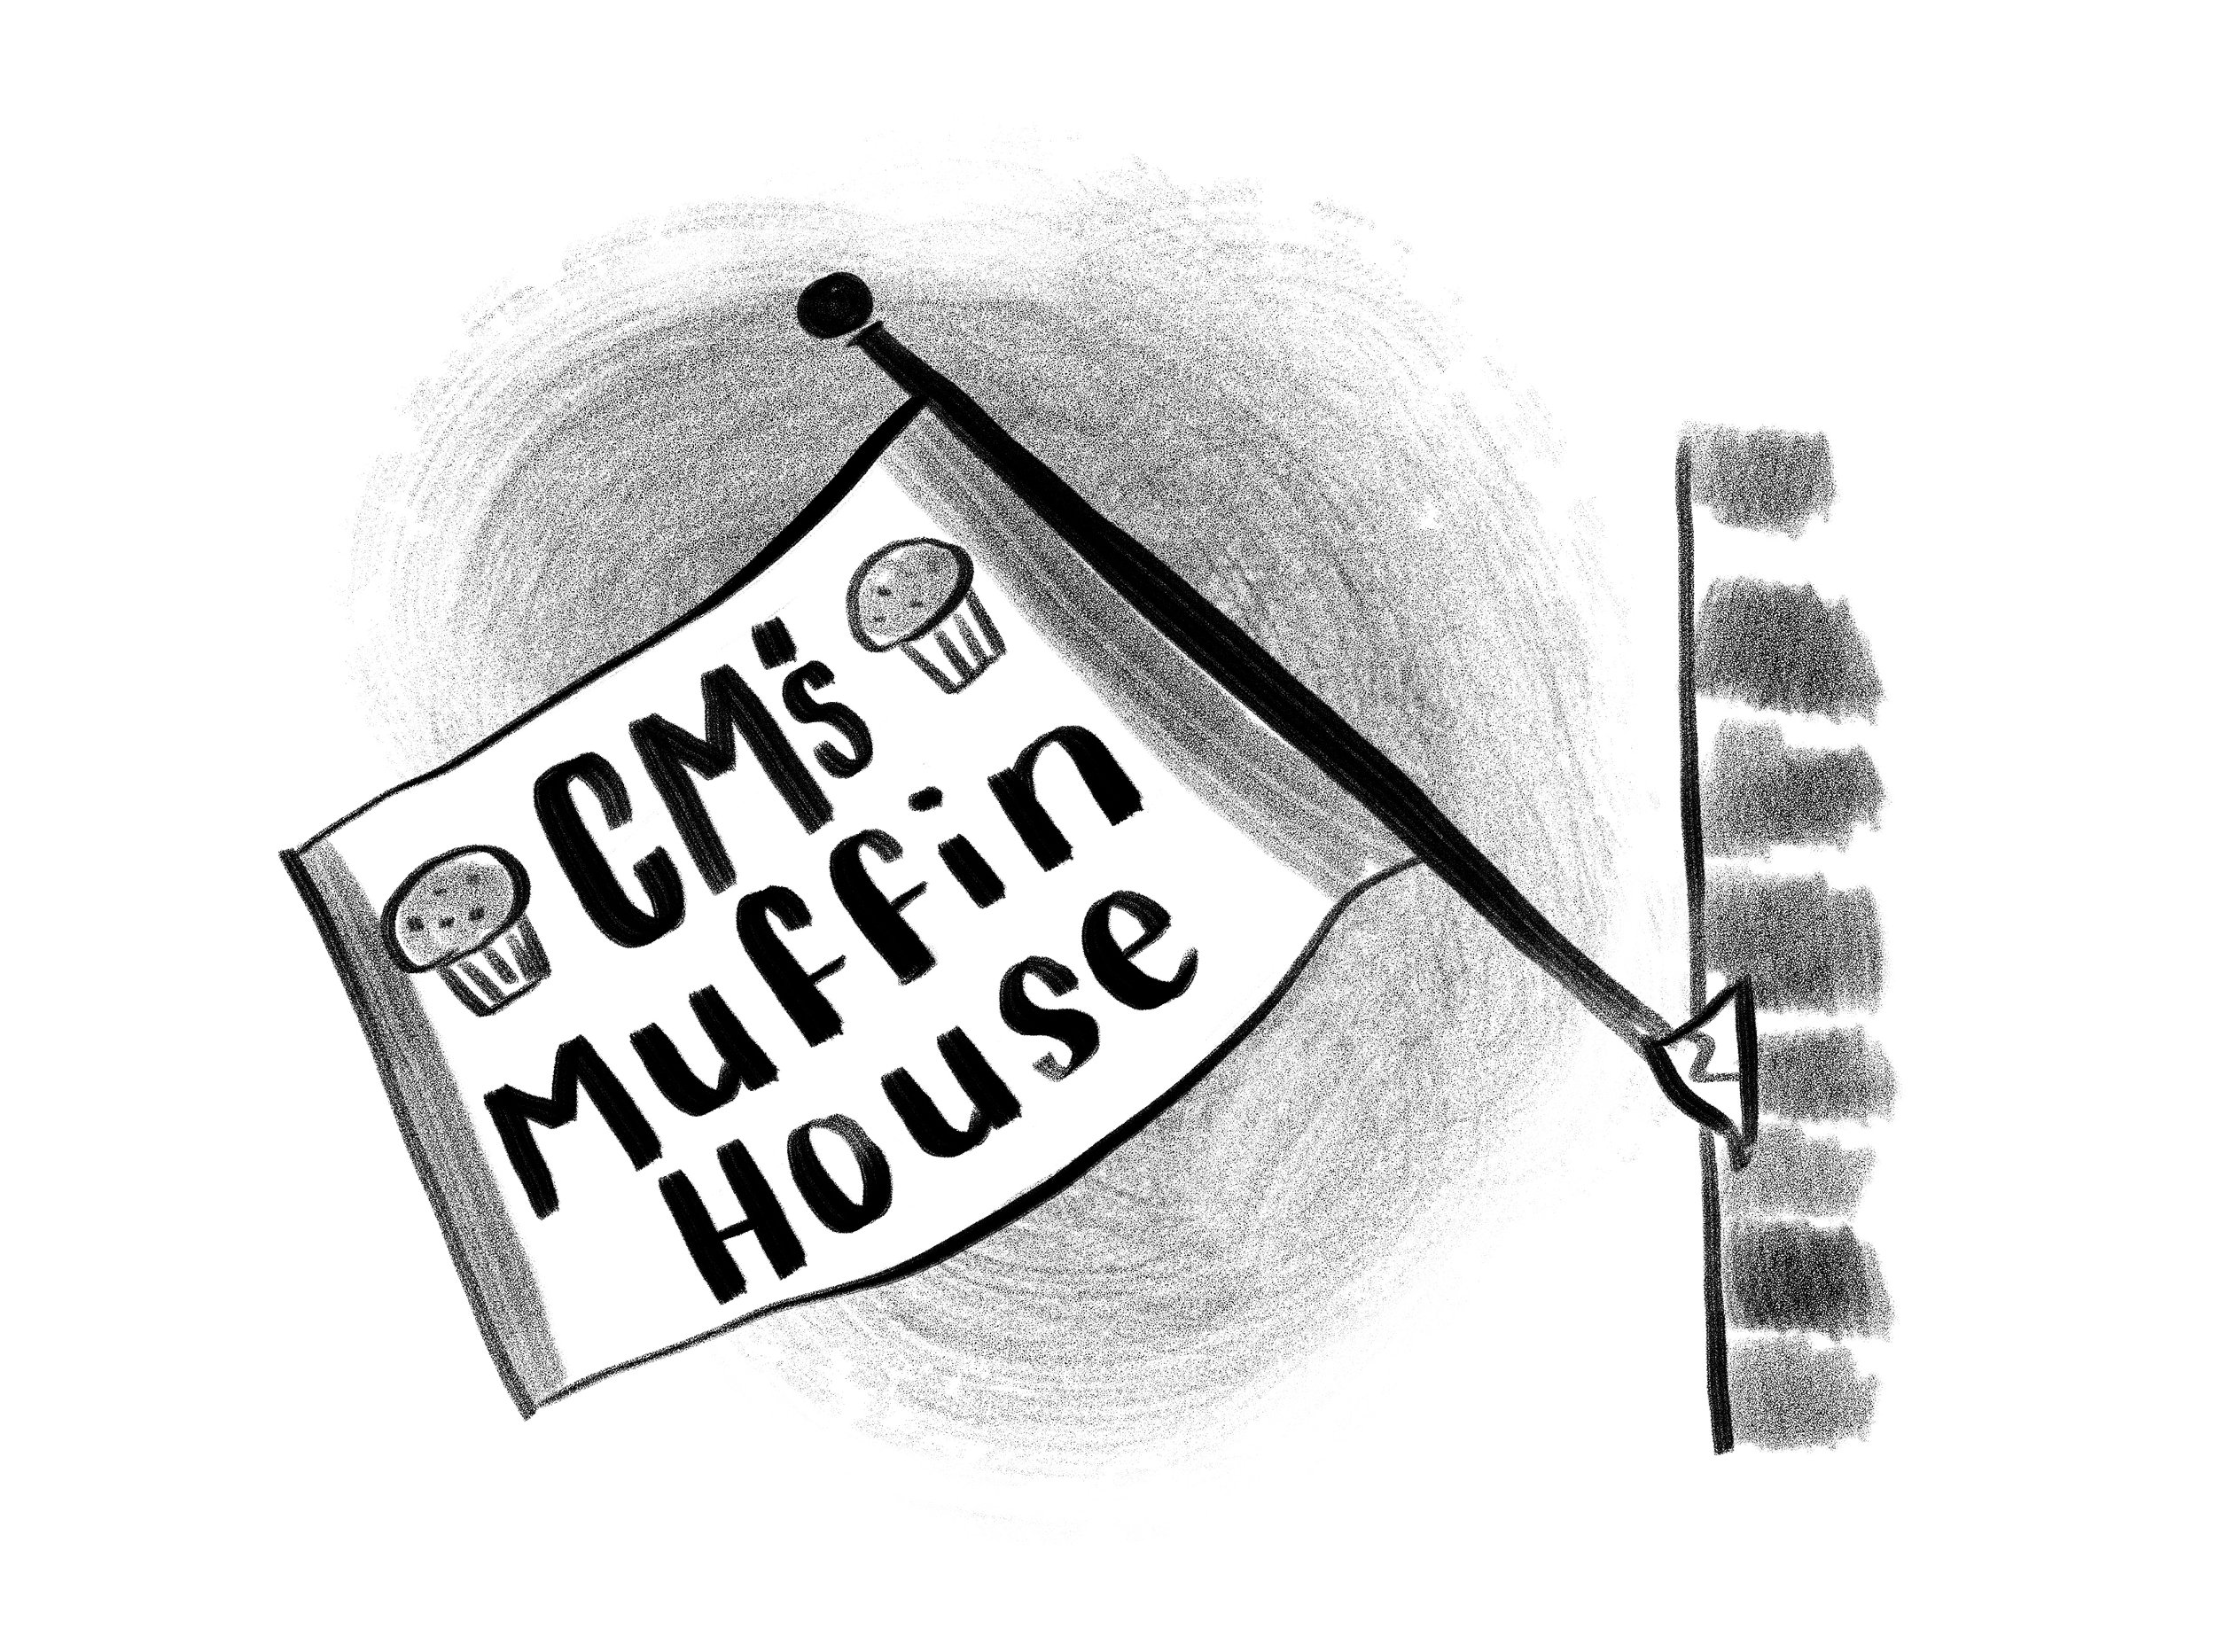 Baking is Messy and So is Life Interior Illustrations-Muffin House Sign copy.jpg